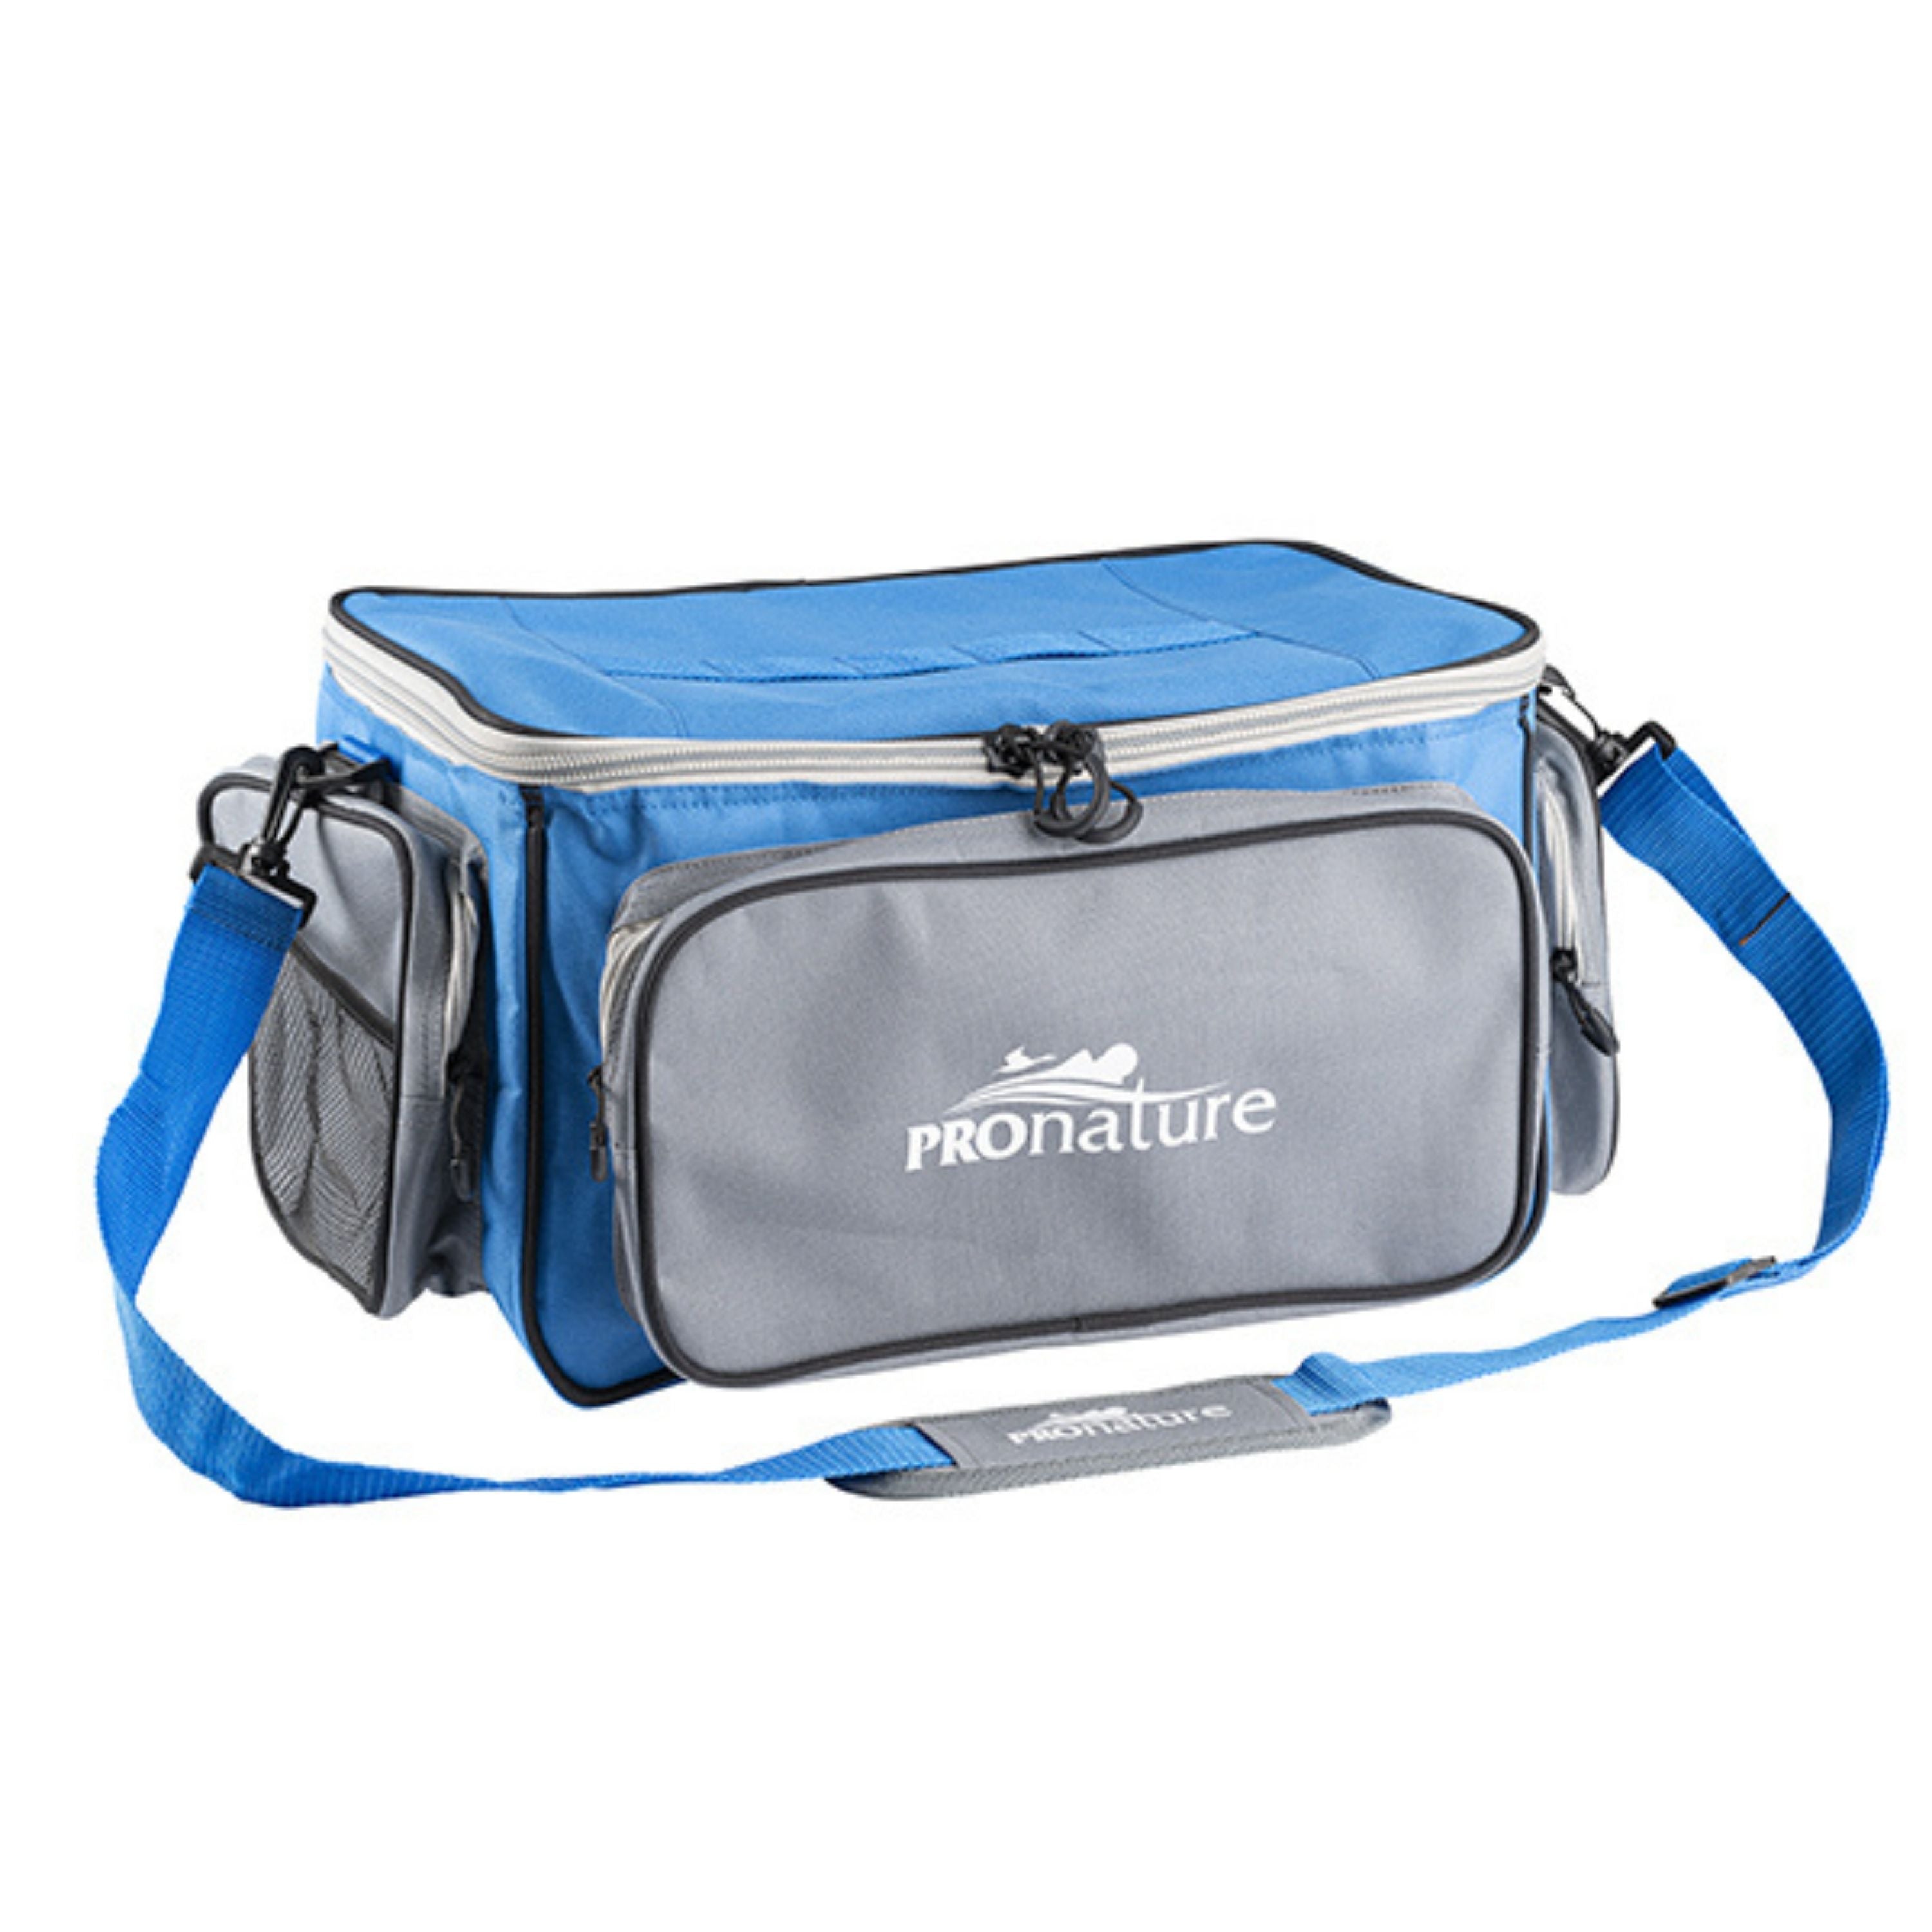 Ice Fishing Gear Bag: Waterproof Bag With Large Capacity For